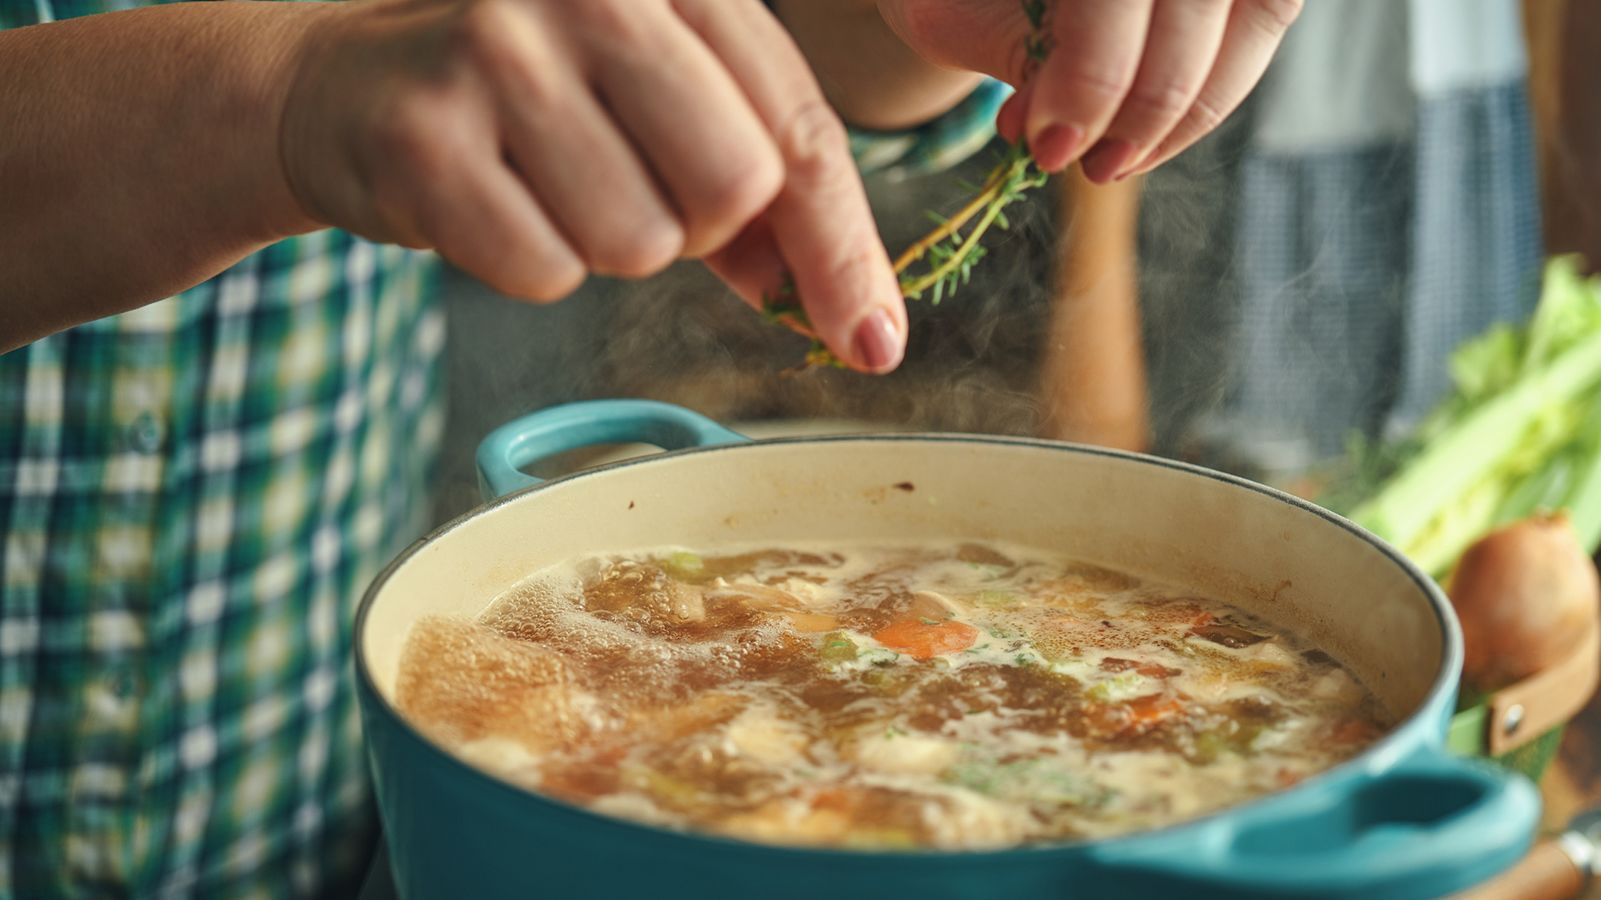 18 essential kitchen tools to make hearty soups